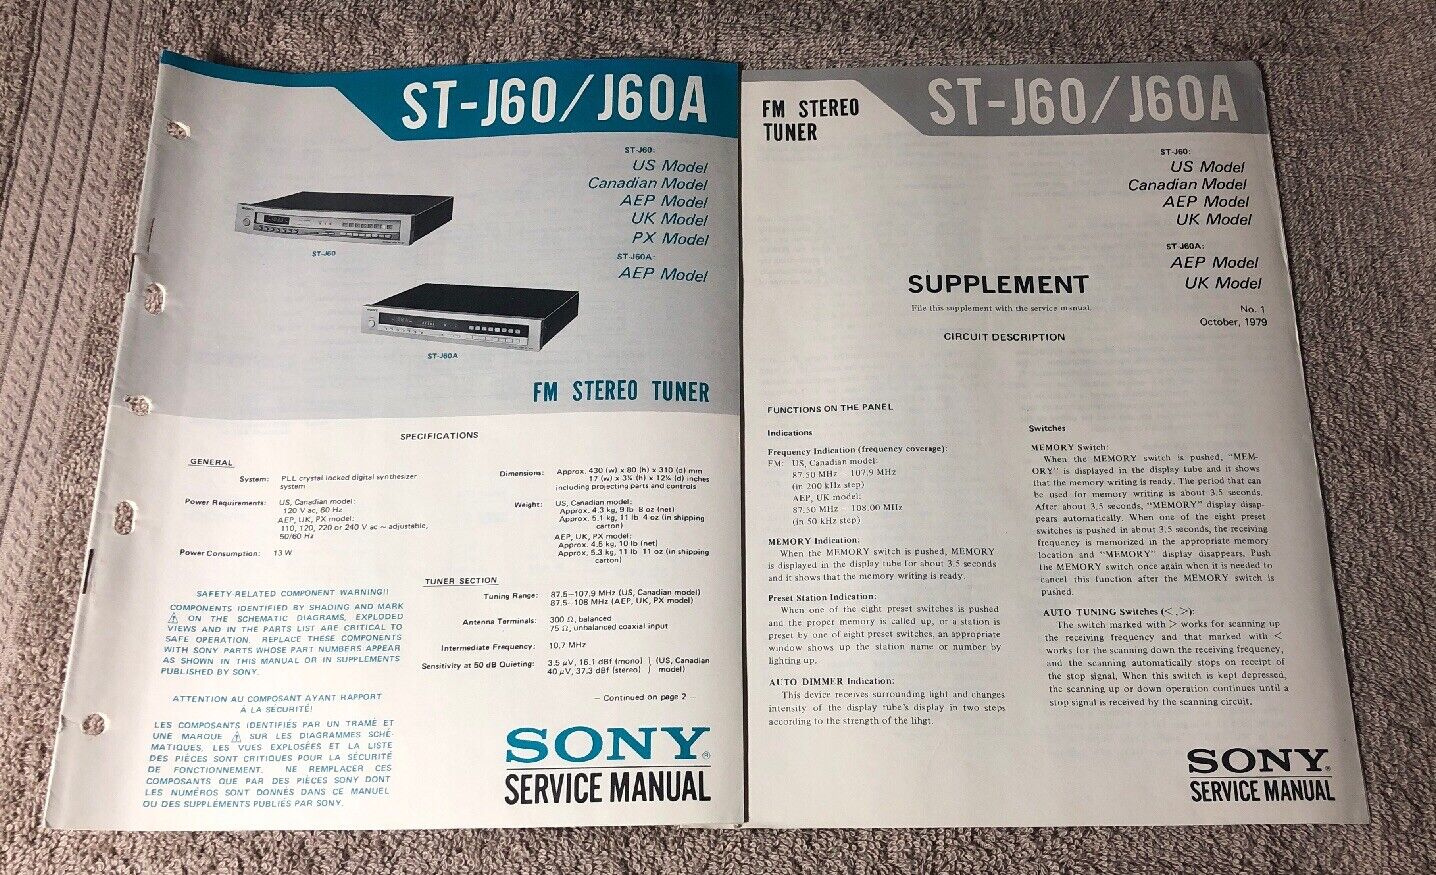 SONY ST-J60/J60A TUNER ORIGINAL SERVICE MANUAL SCHEMATIC WITH SUPPLEMENT M739x